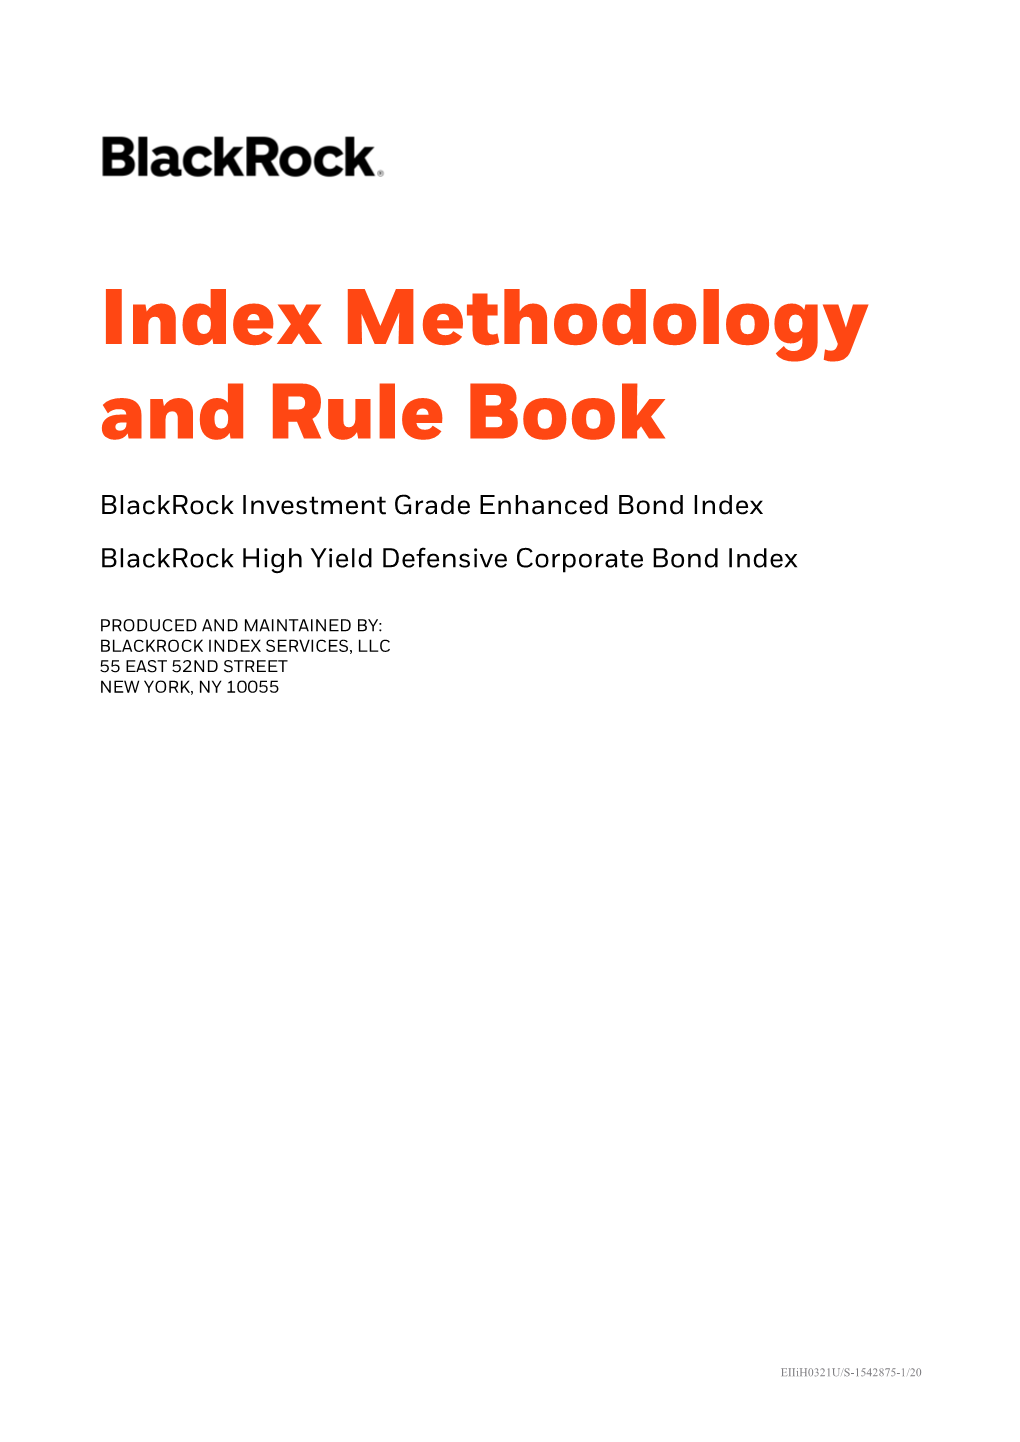 Index Methodology and Rule Book